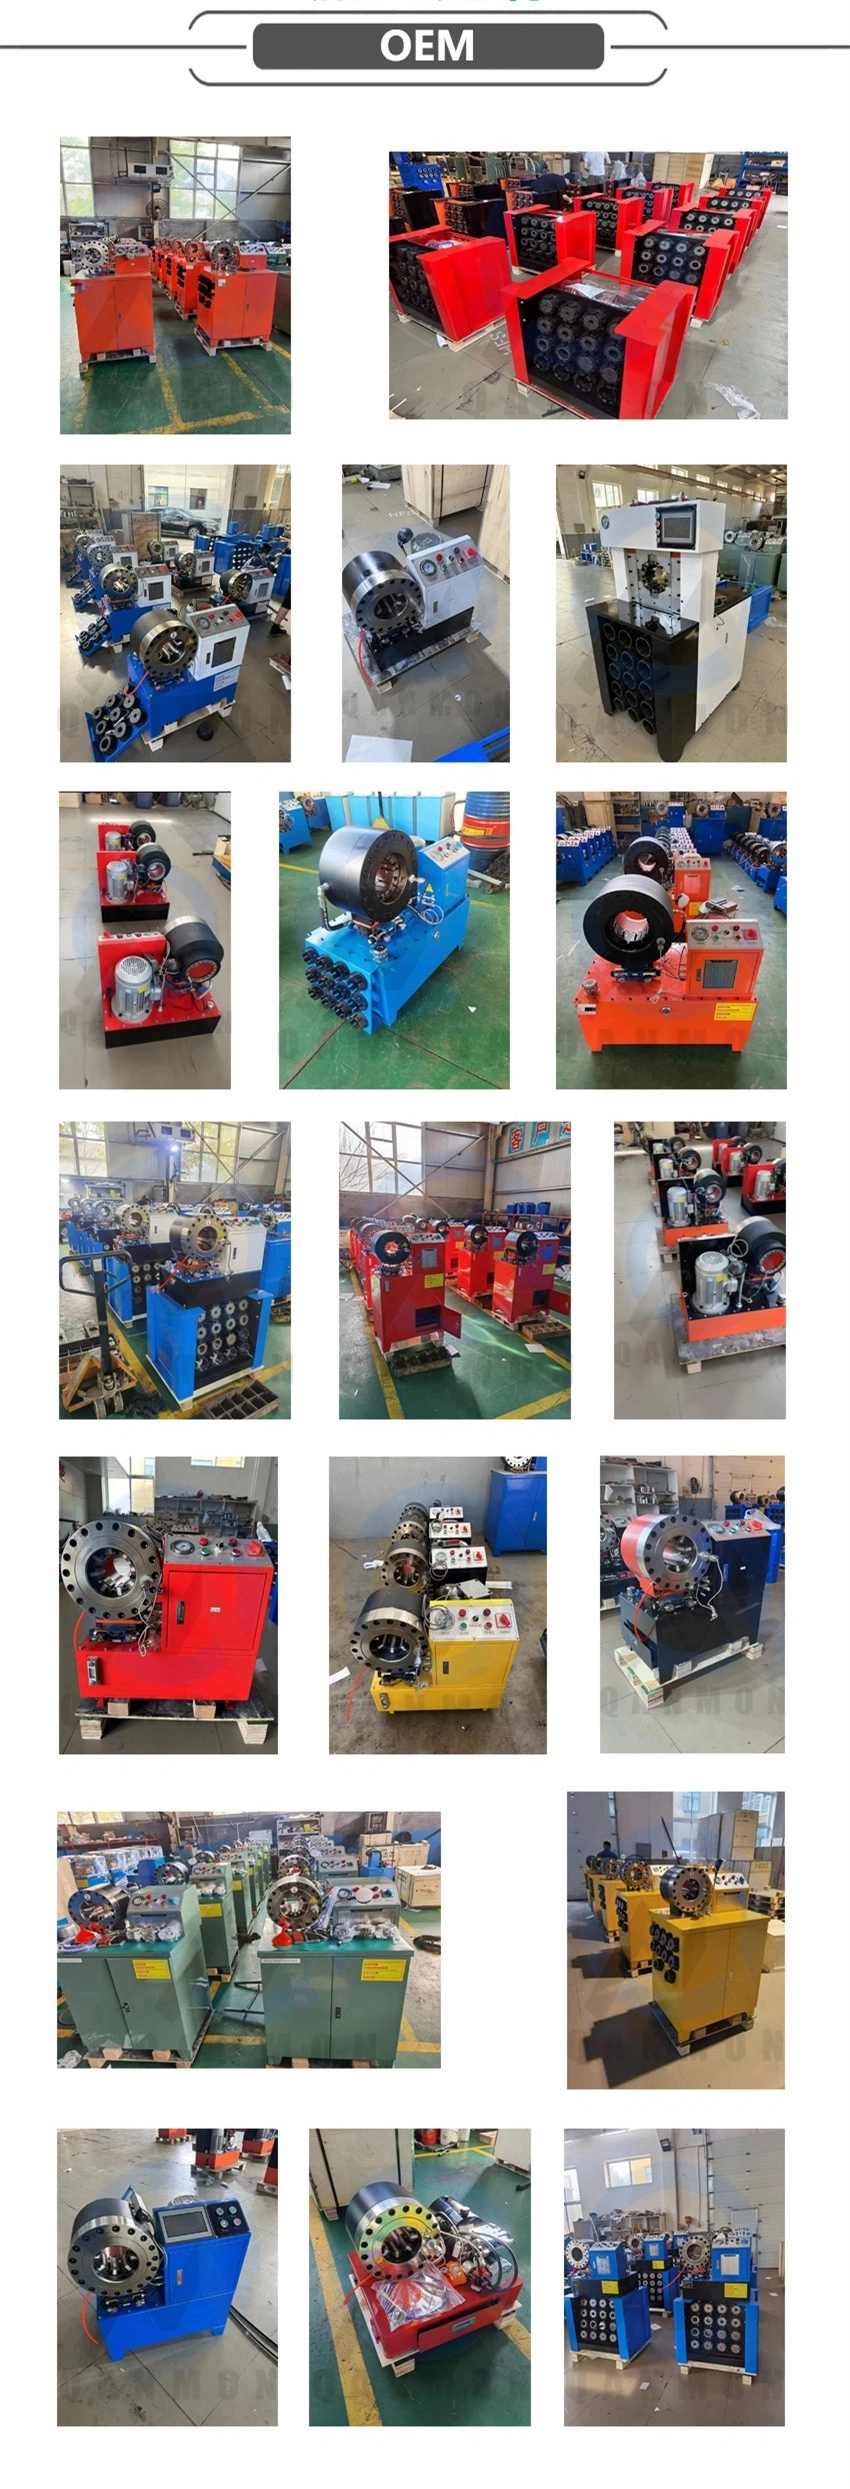 Outdoor Operate 1/4-2 4sp 12V 24V Battery Industrial Press Tool Air Conditioner Hydraulic Hose Crimping Machine High Pressure